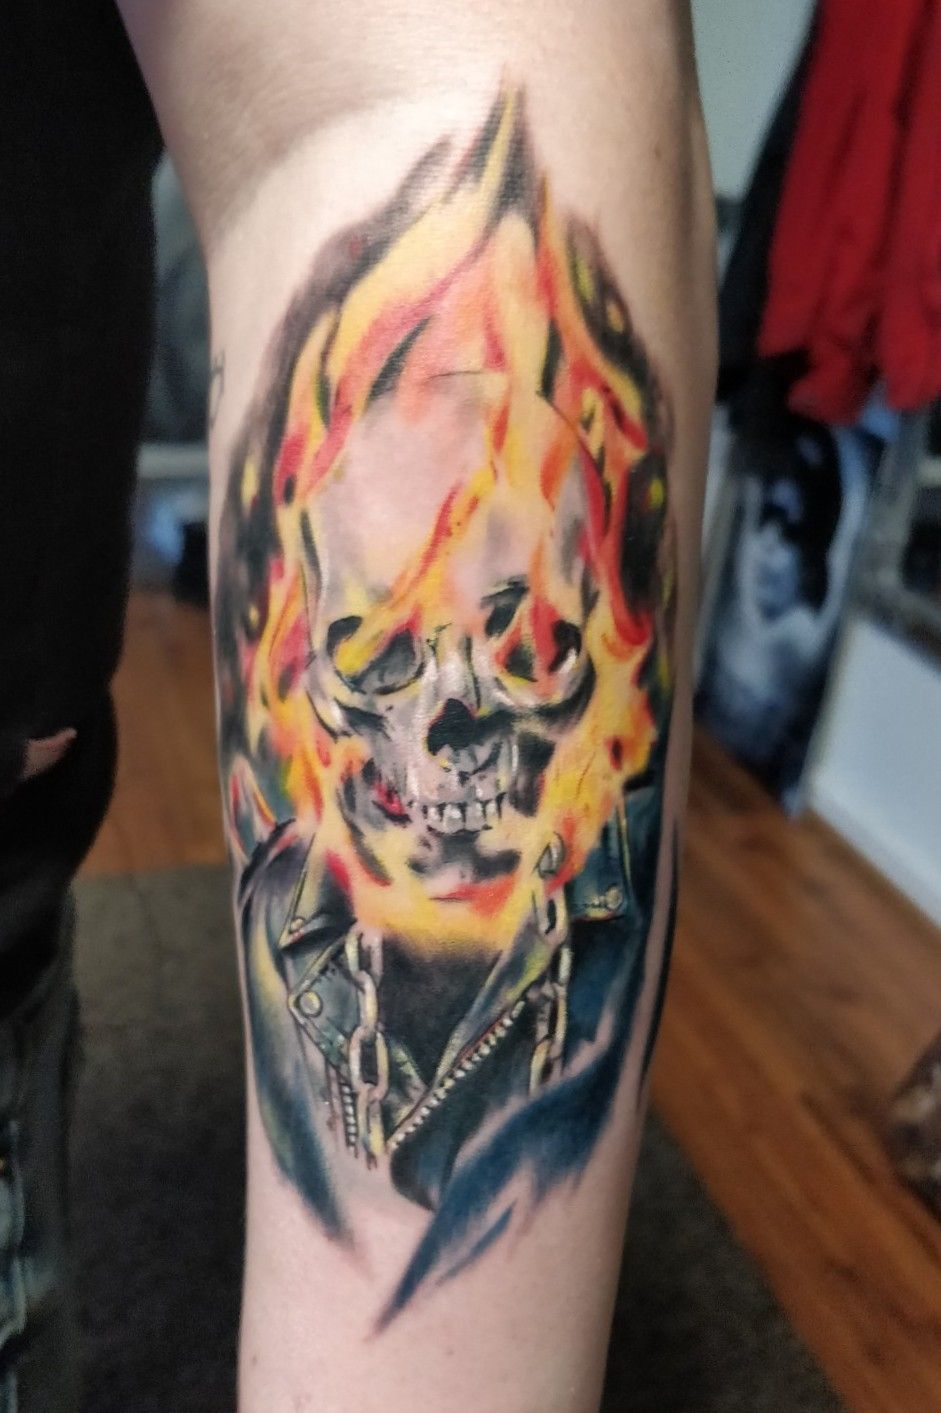 Awesome ghost rider tattoo is awesome  9GAG